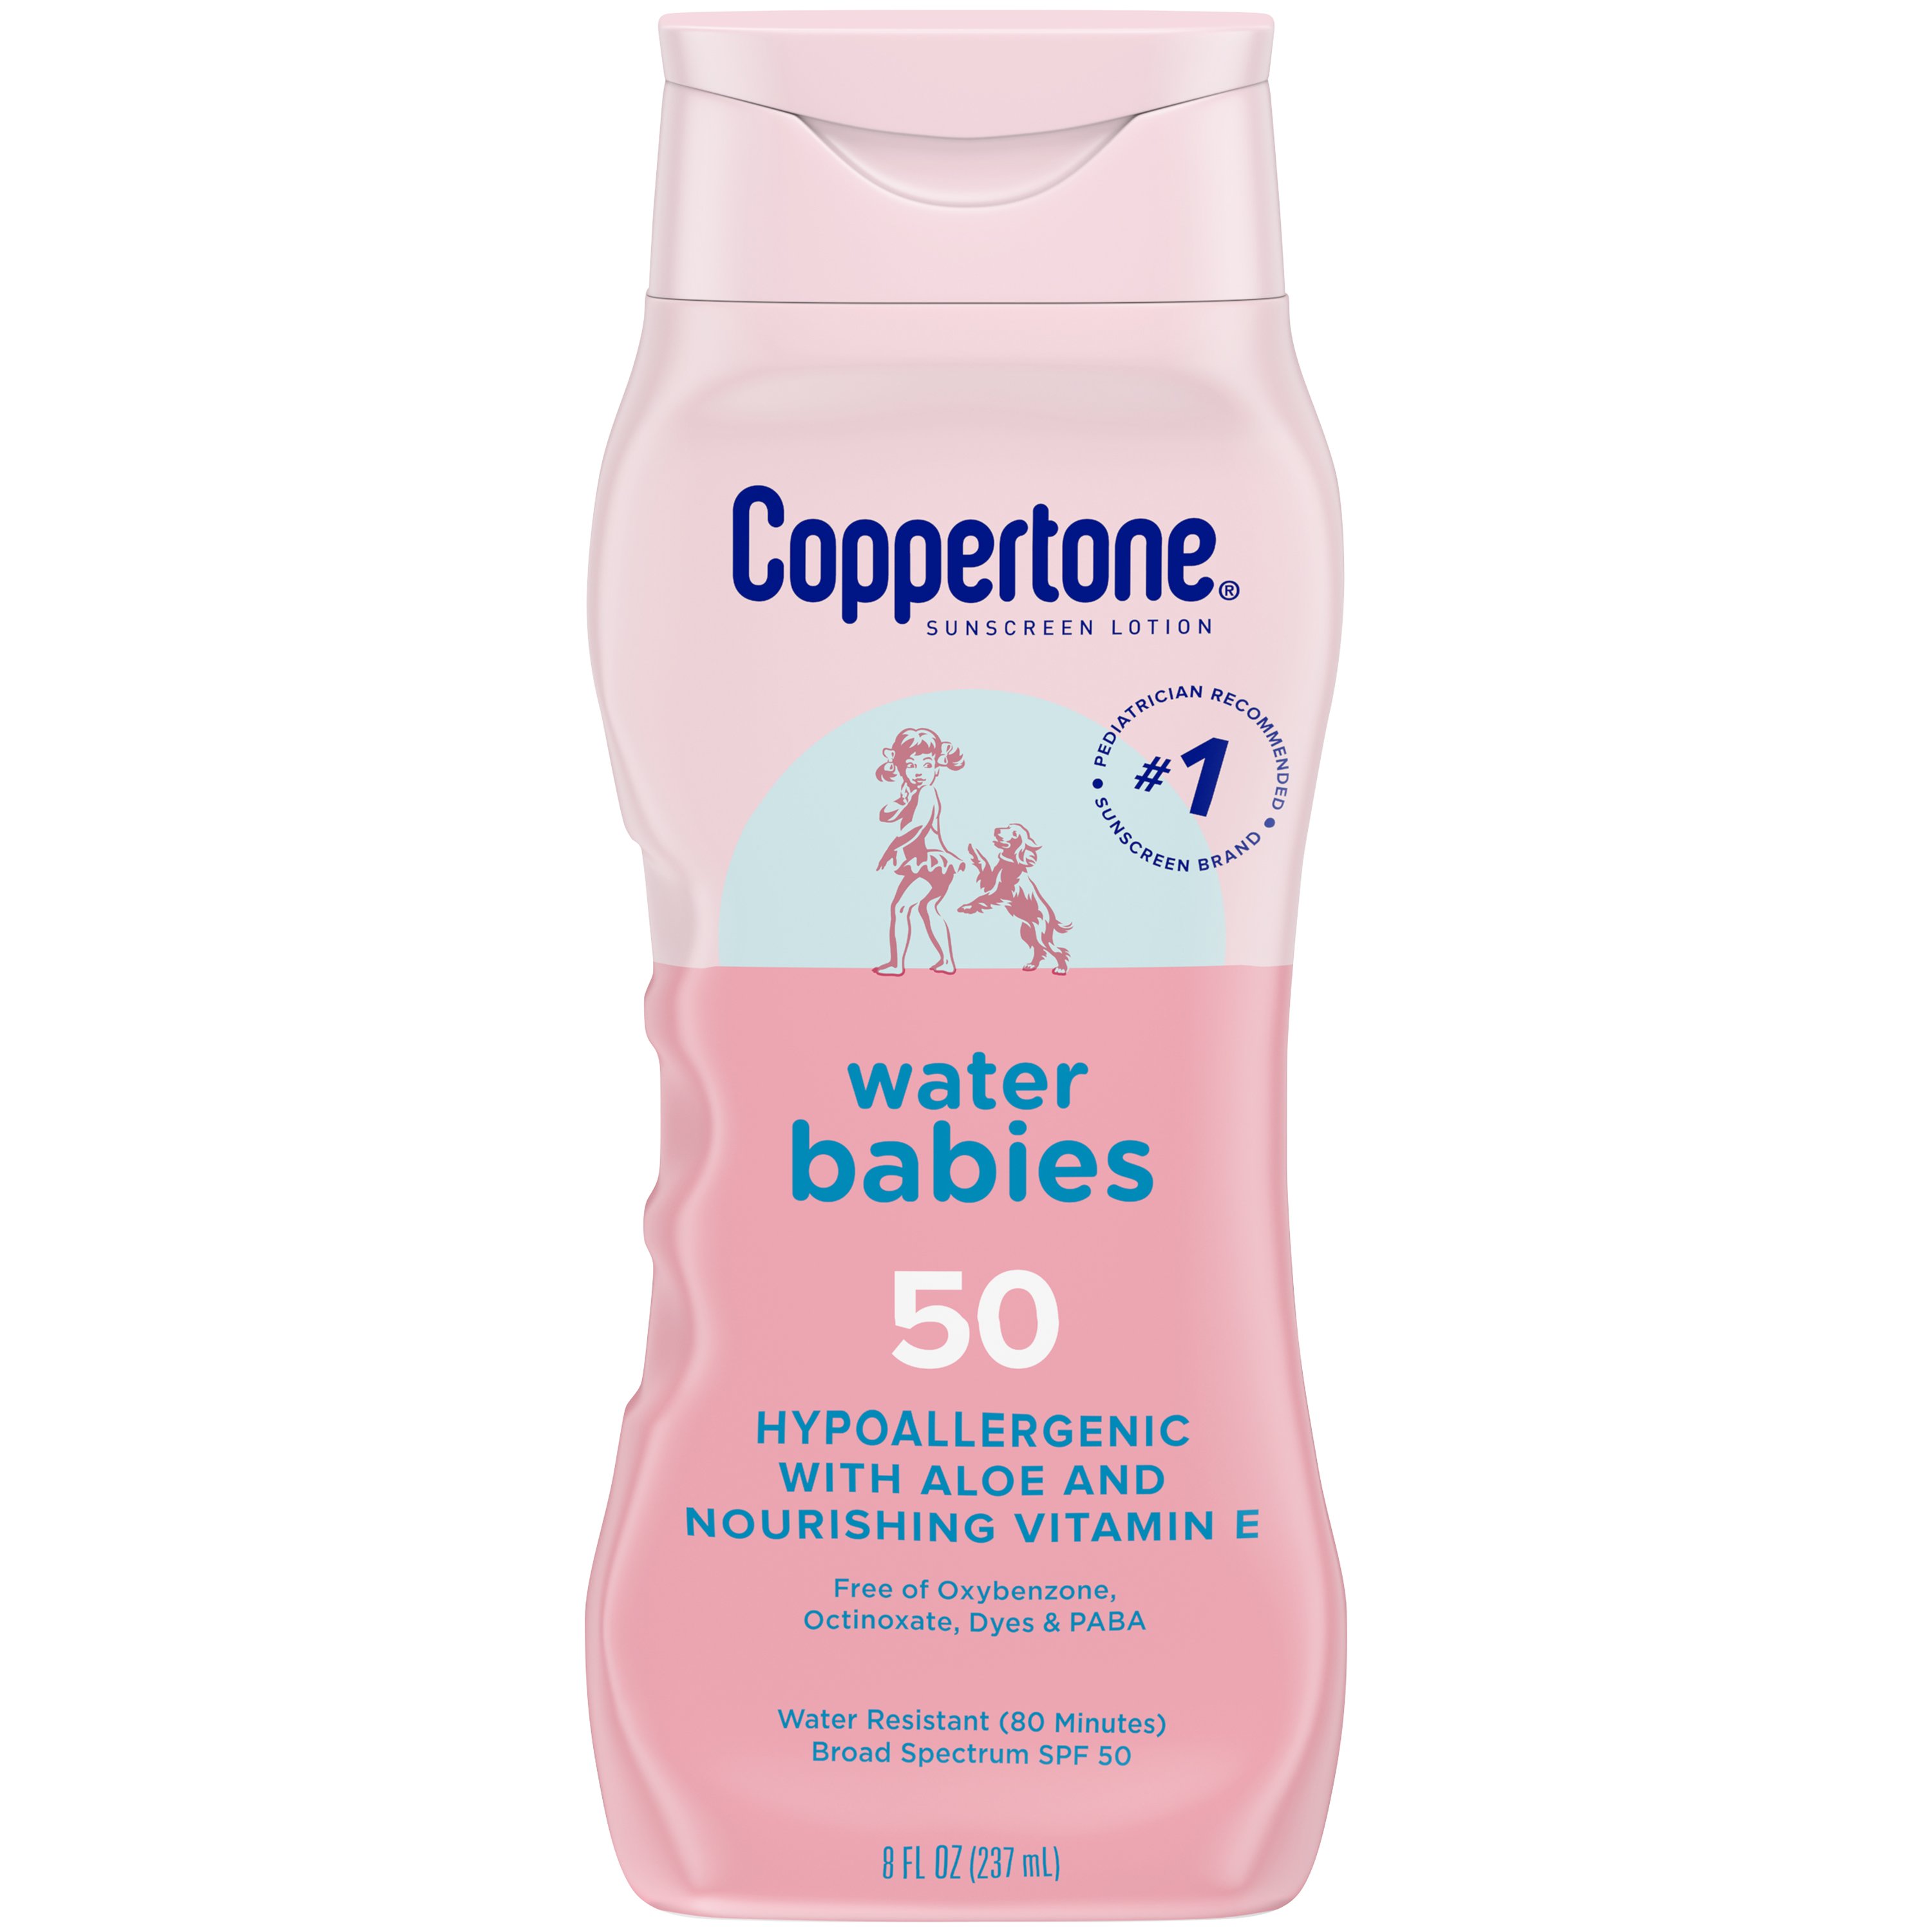 Coppertone Water Babies Sunscreen Lotion 50 - Sunscreen & Self Tanners at H-E-B